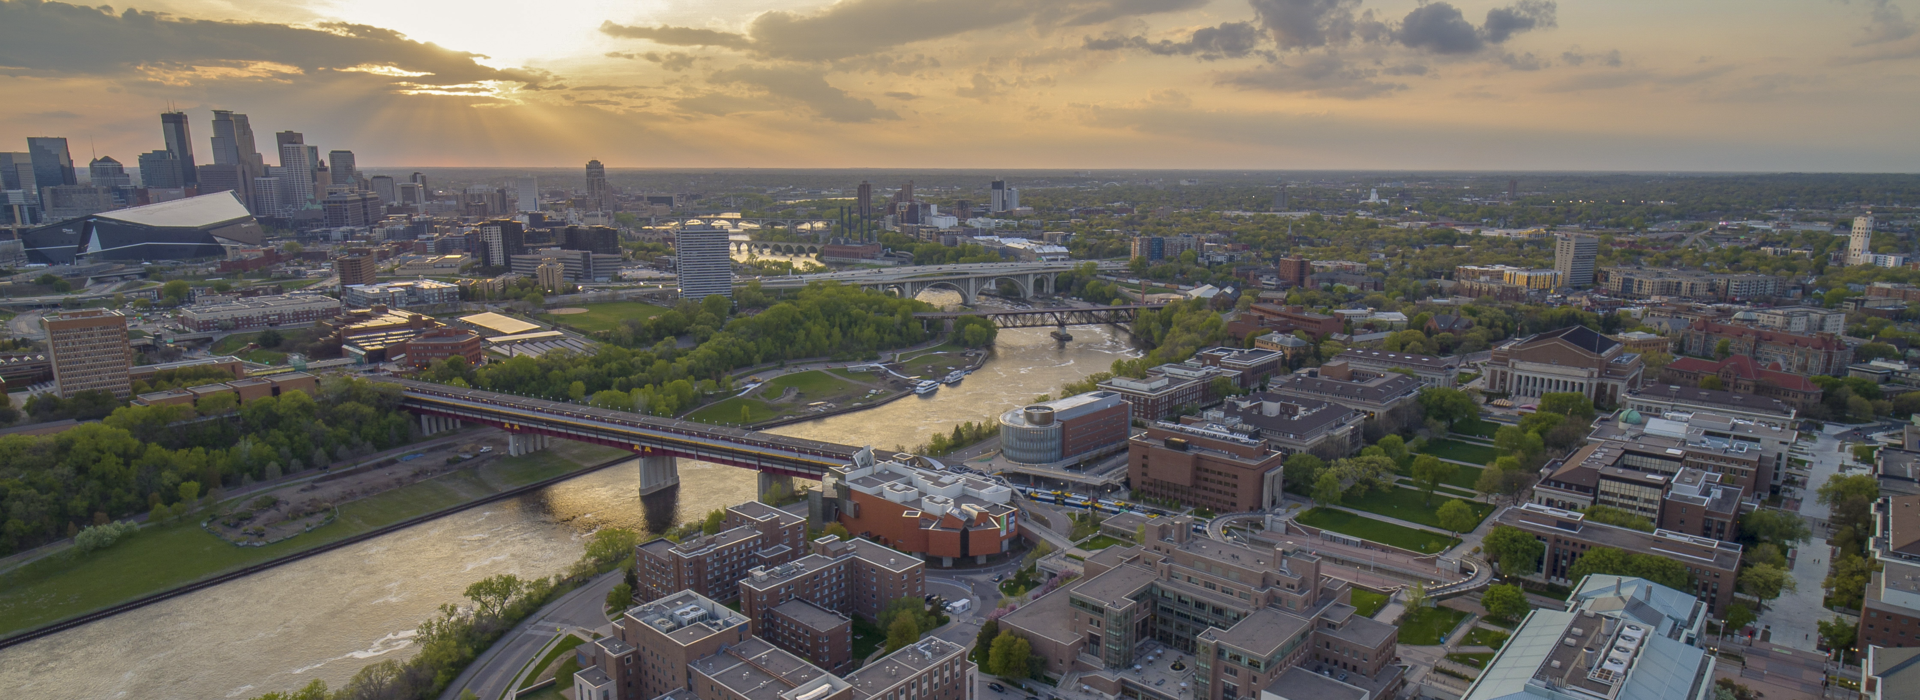 Bird's-eye view of the Minneapolis skyline, the Minnesota River, and the east and west banks of the UMN campus